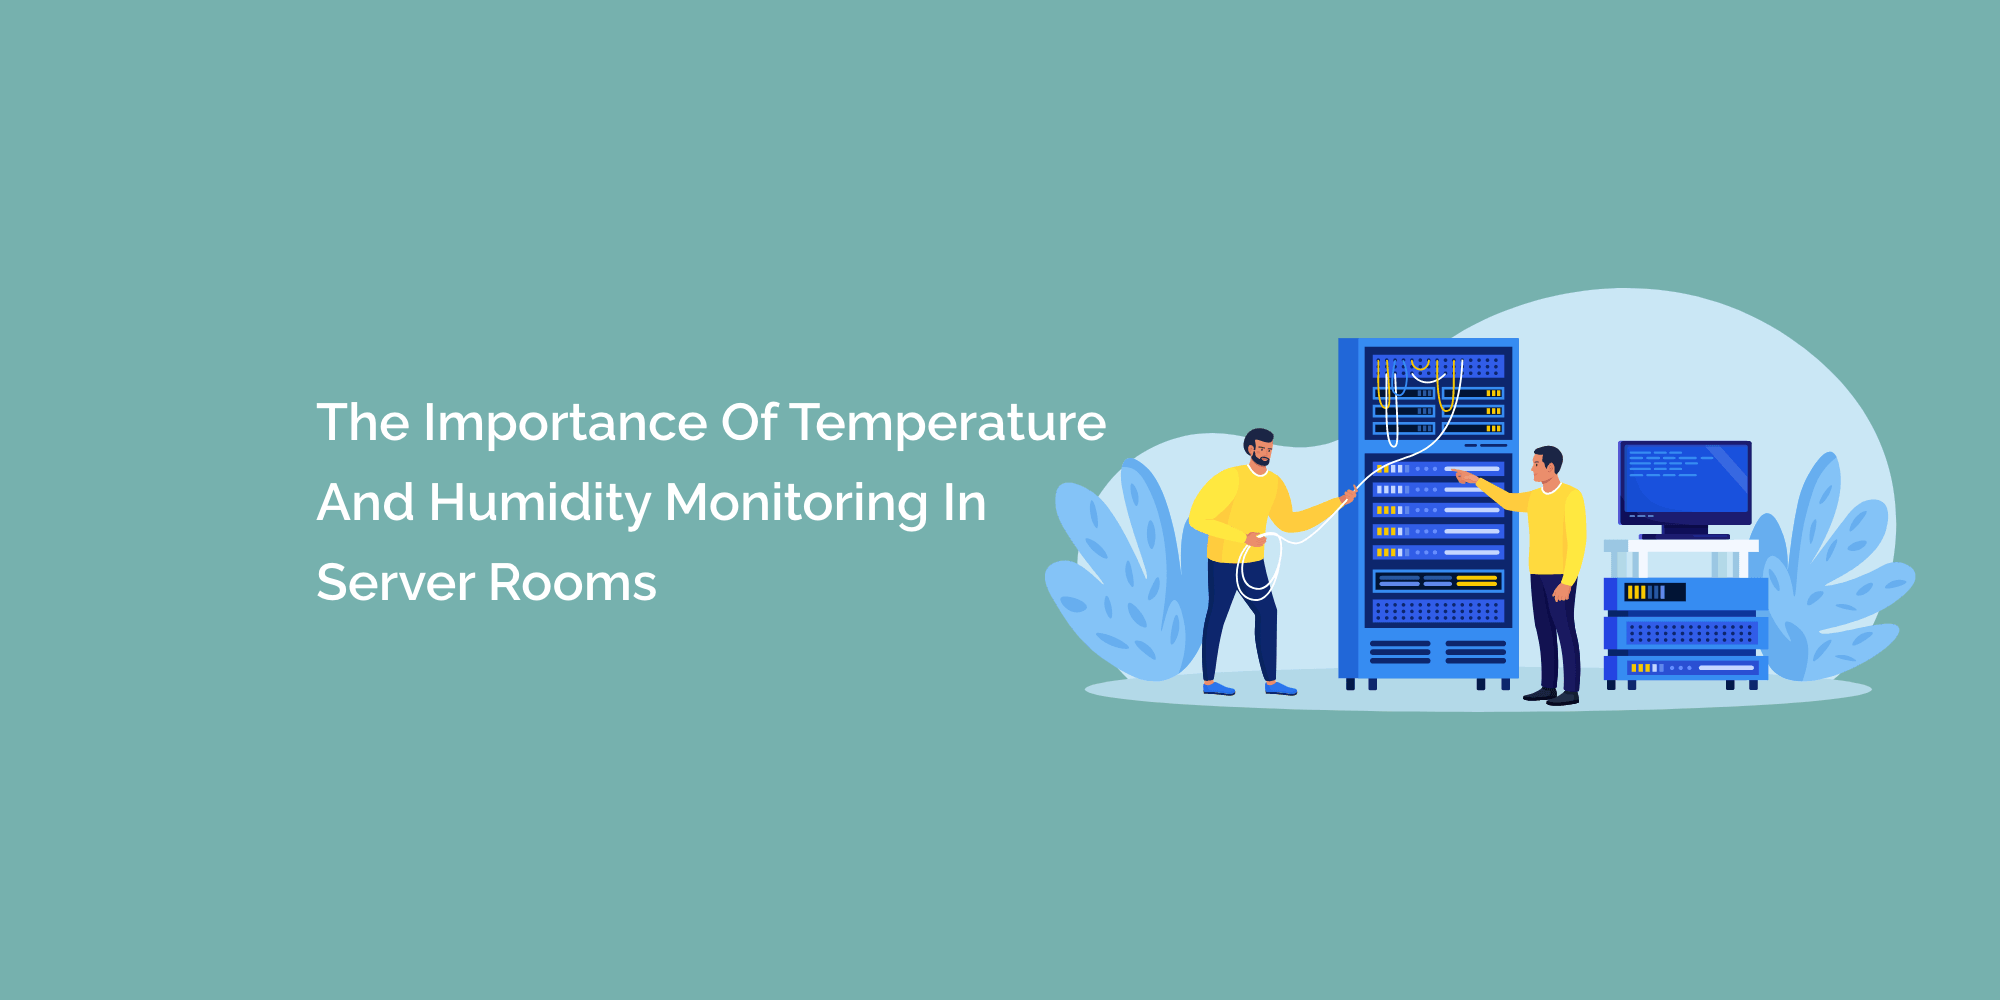 The Importance of Temperature and Humidity Monitoring in Server Rooms